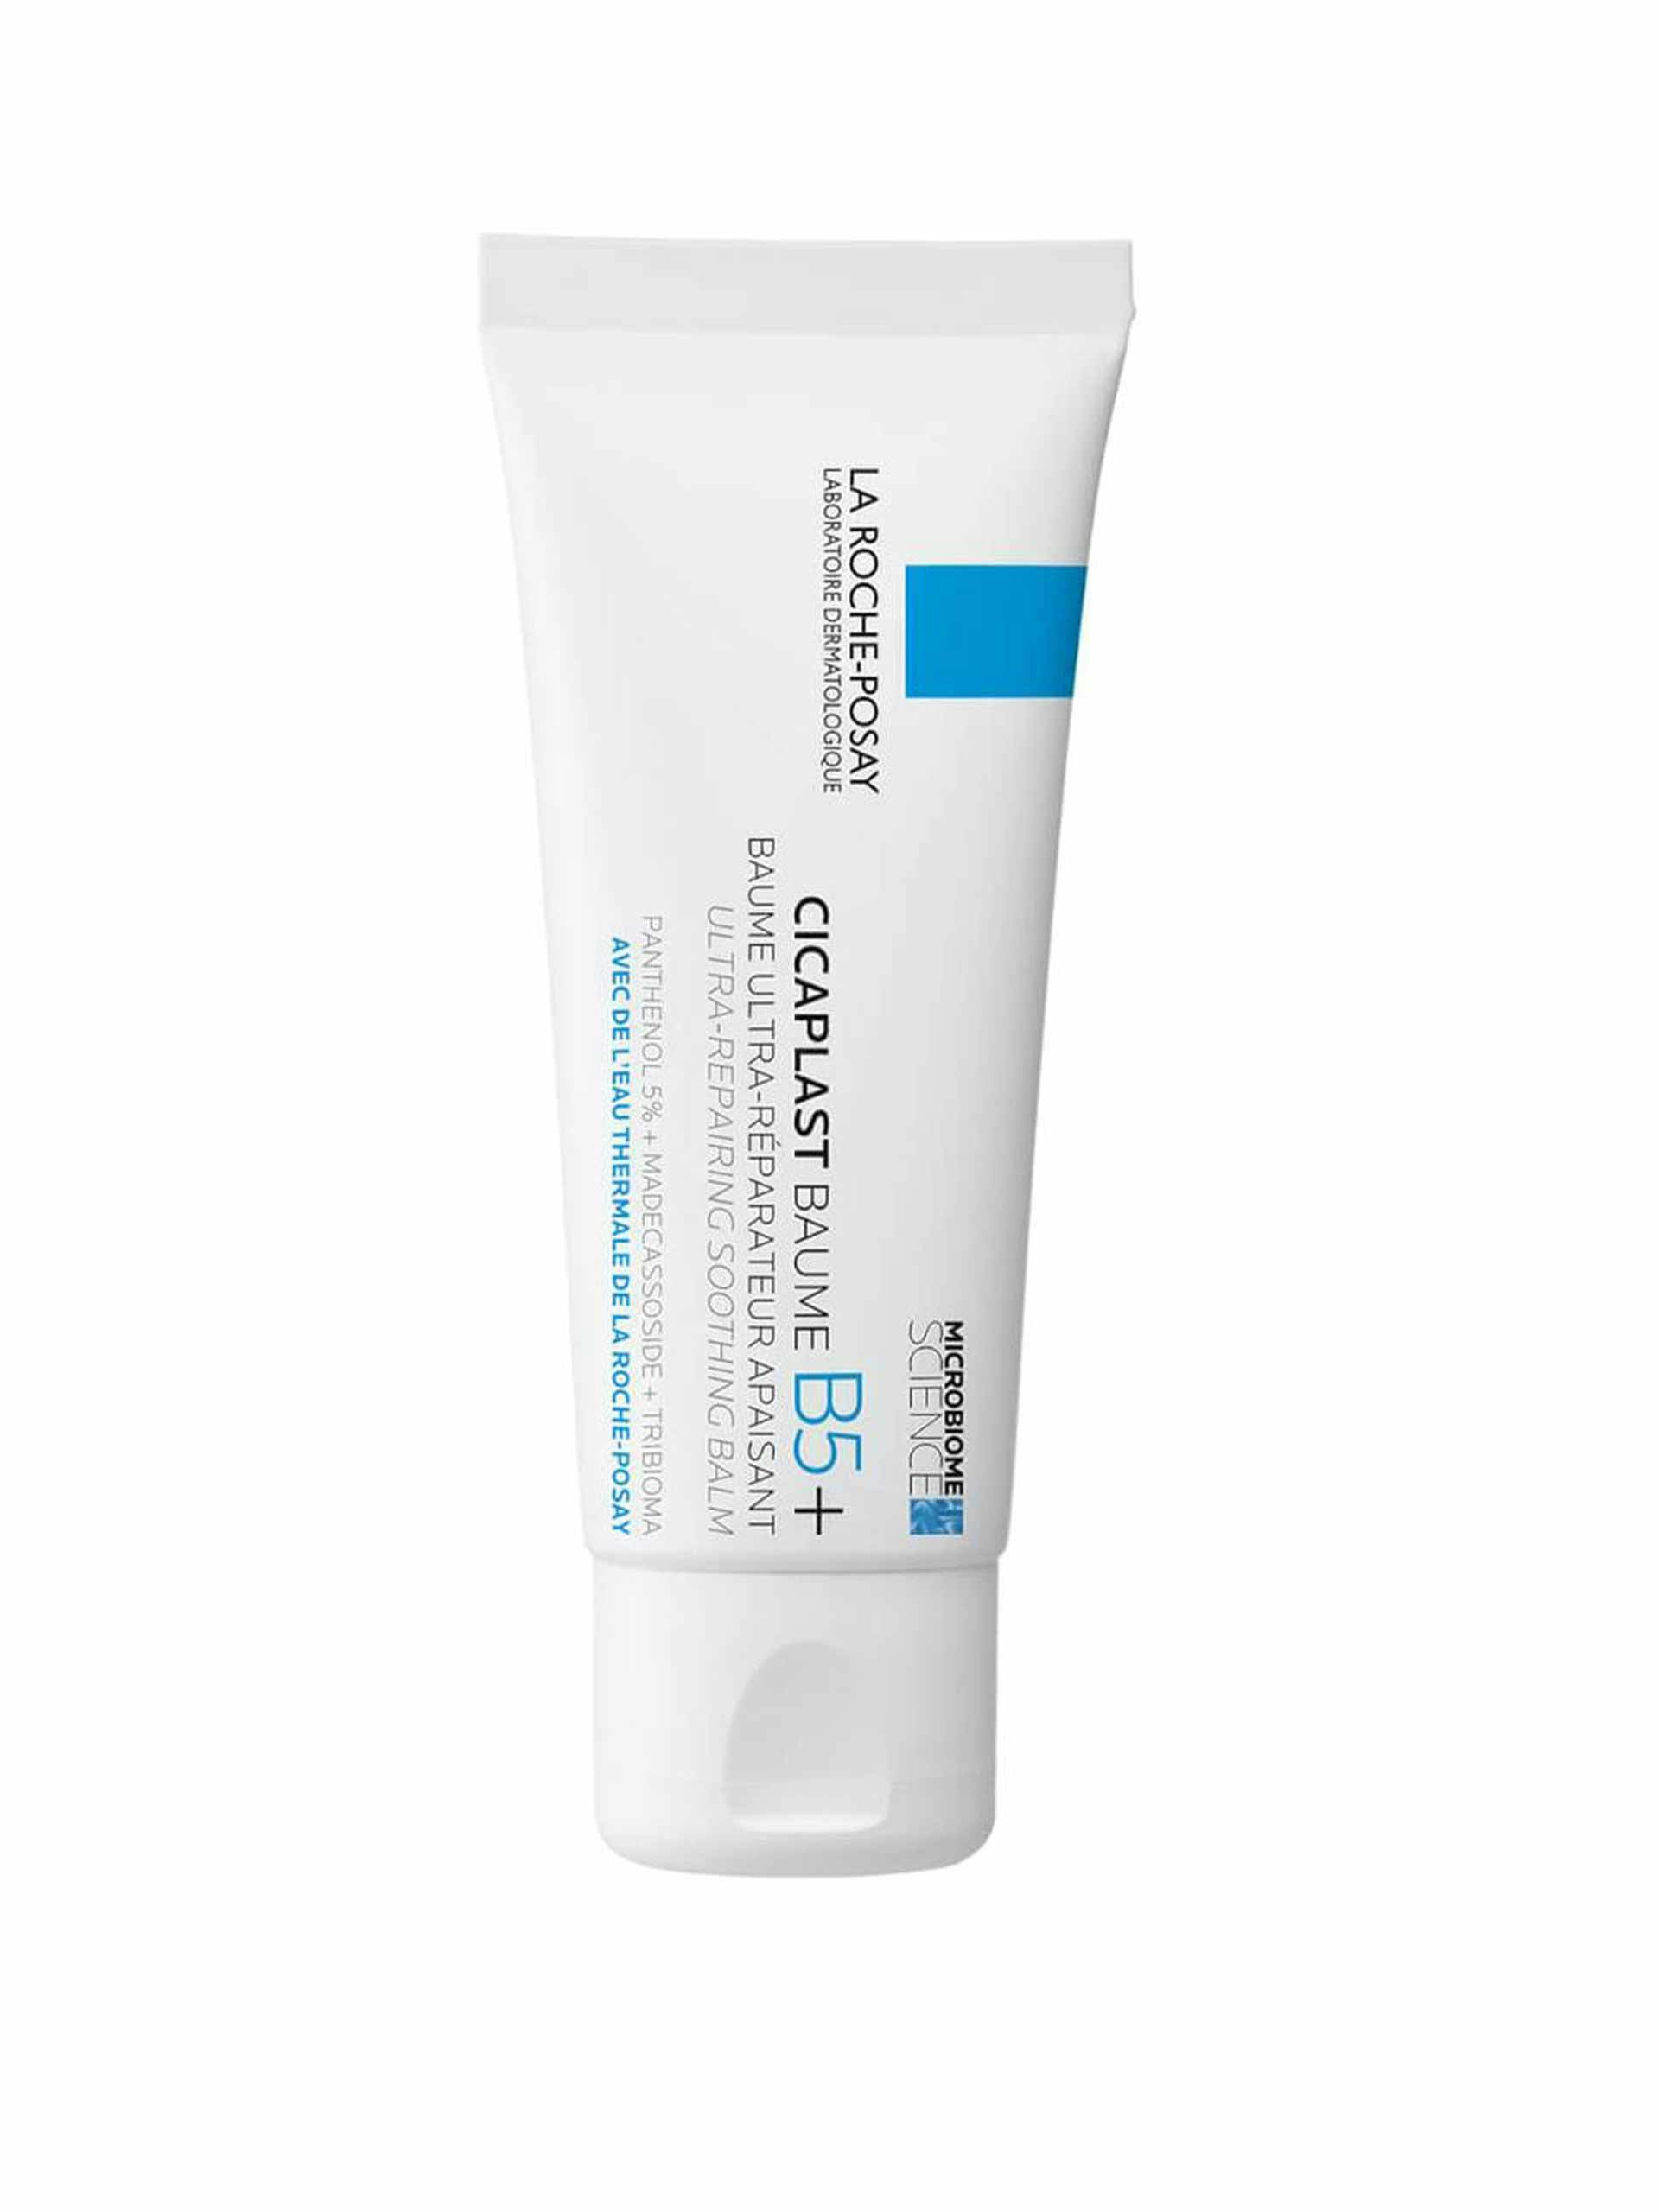 Cicaplast soothing face and body balm